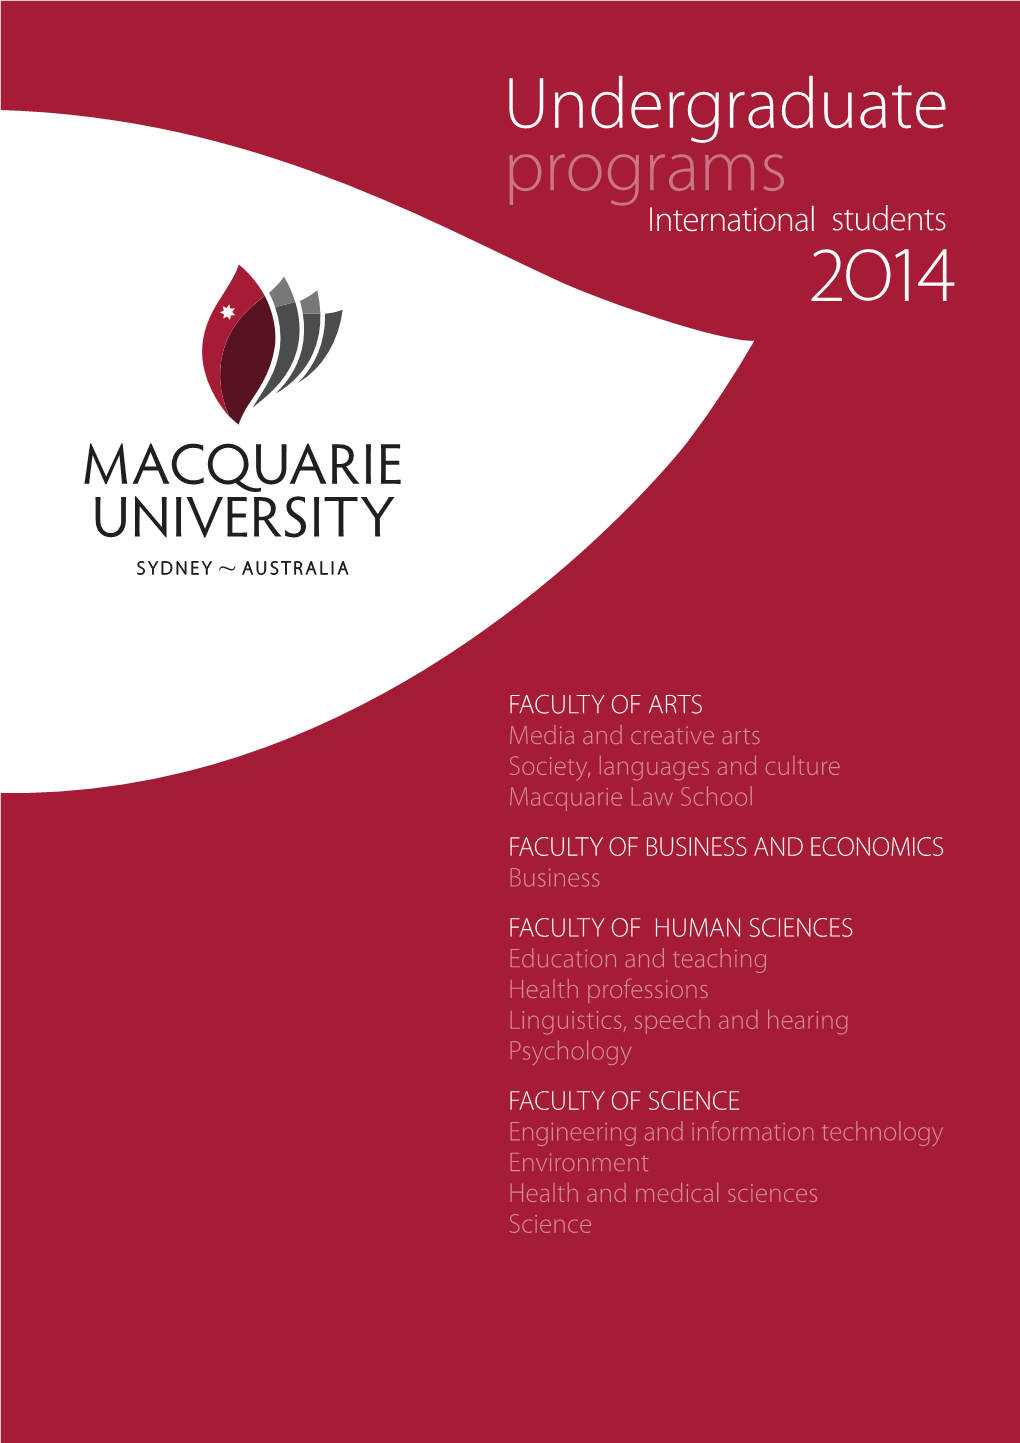 Reasons to Choose Education and Teaching at Macquarie